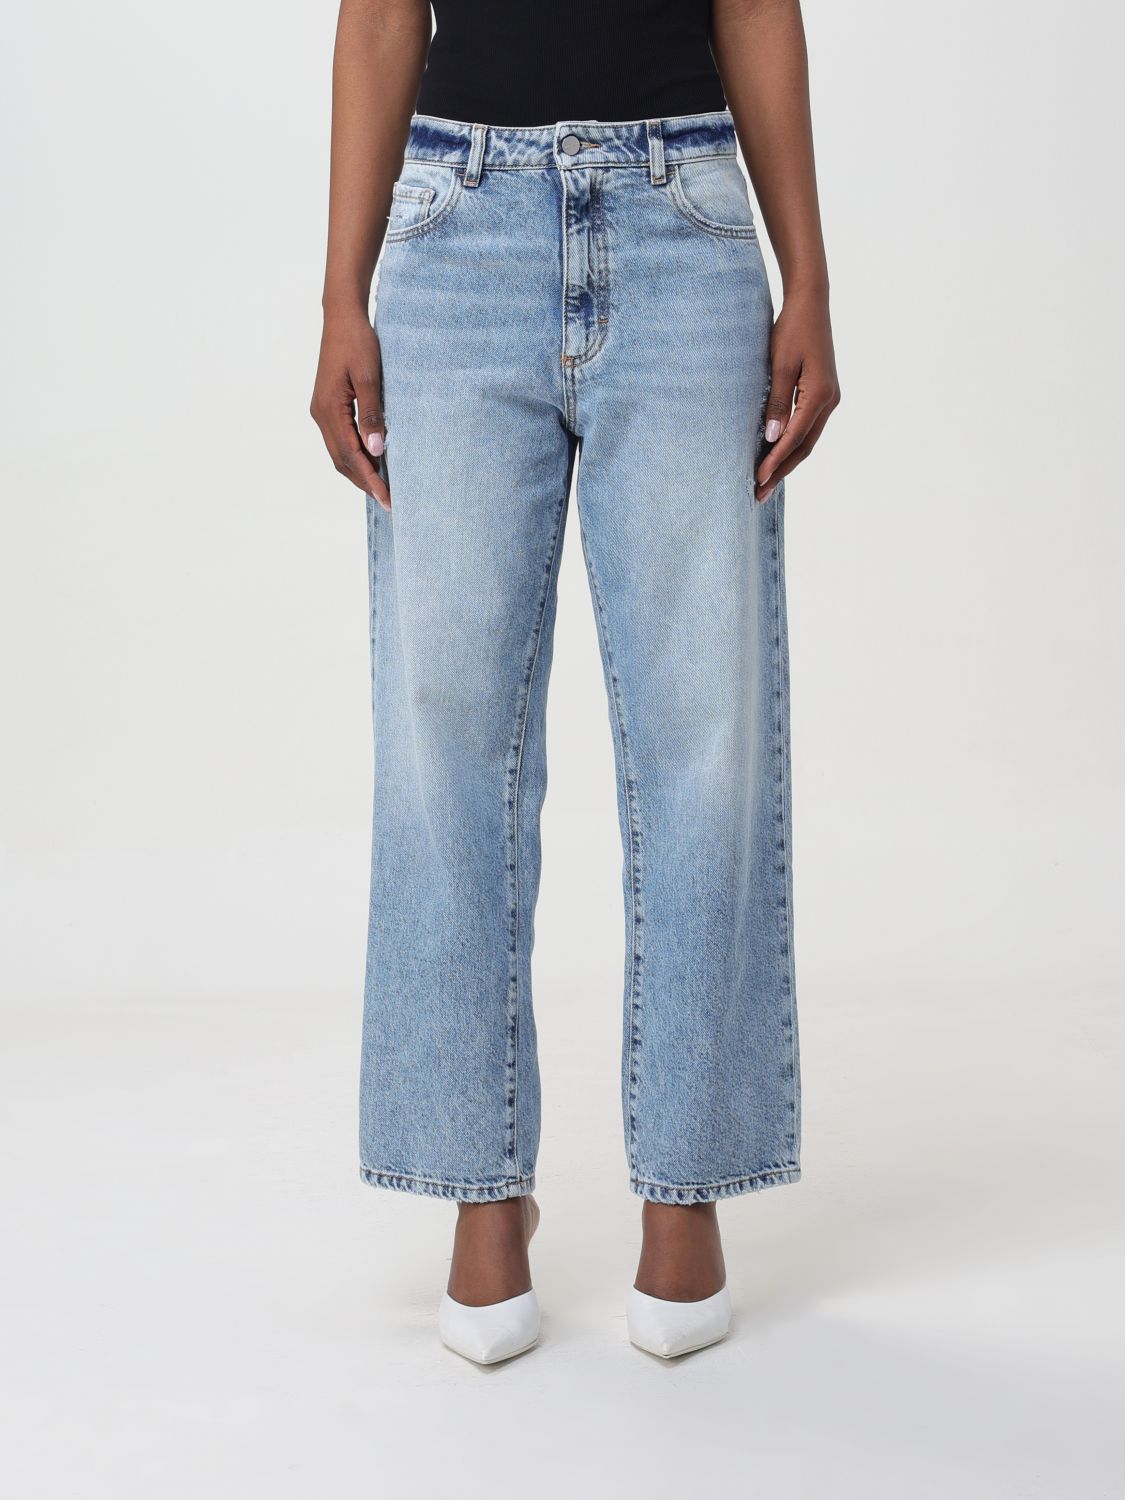 jeans icon denim los angeles woman color stone washed